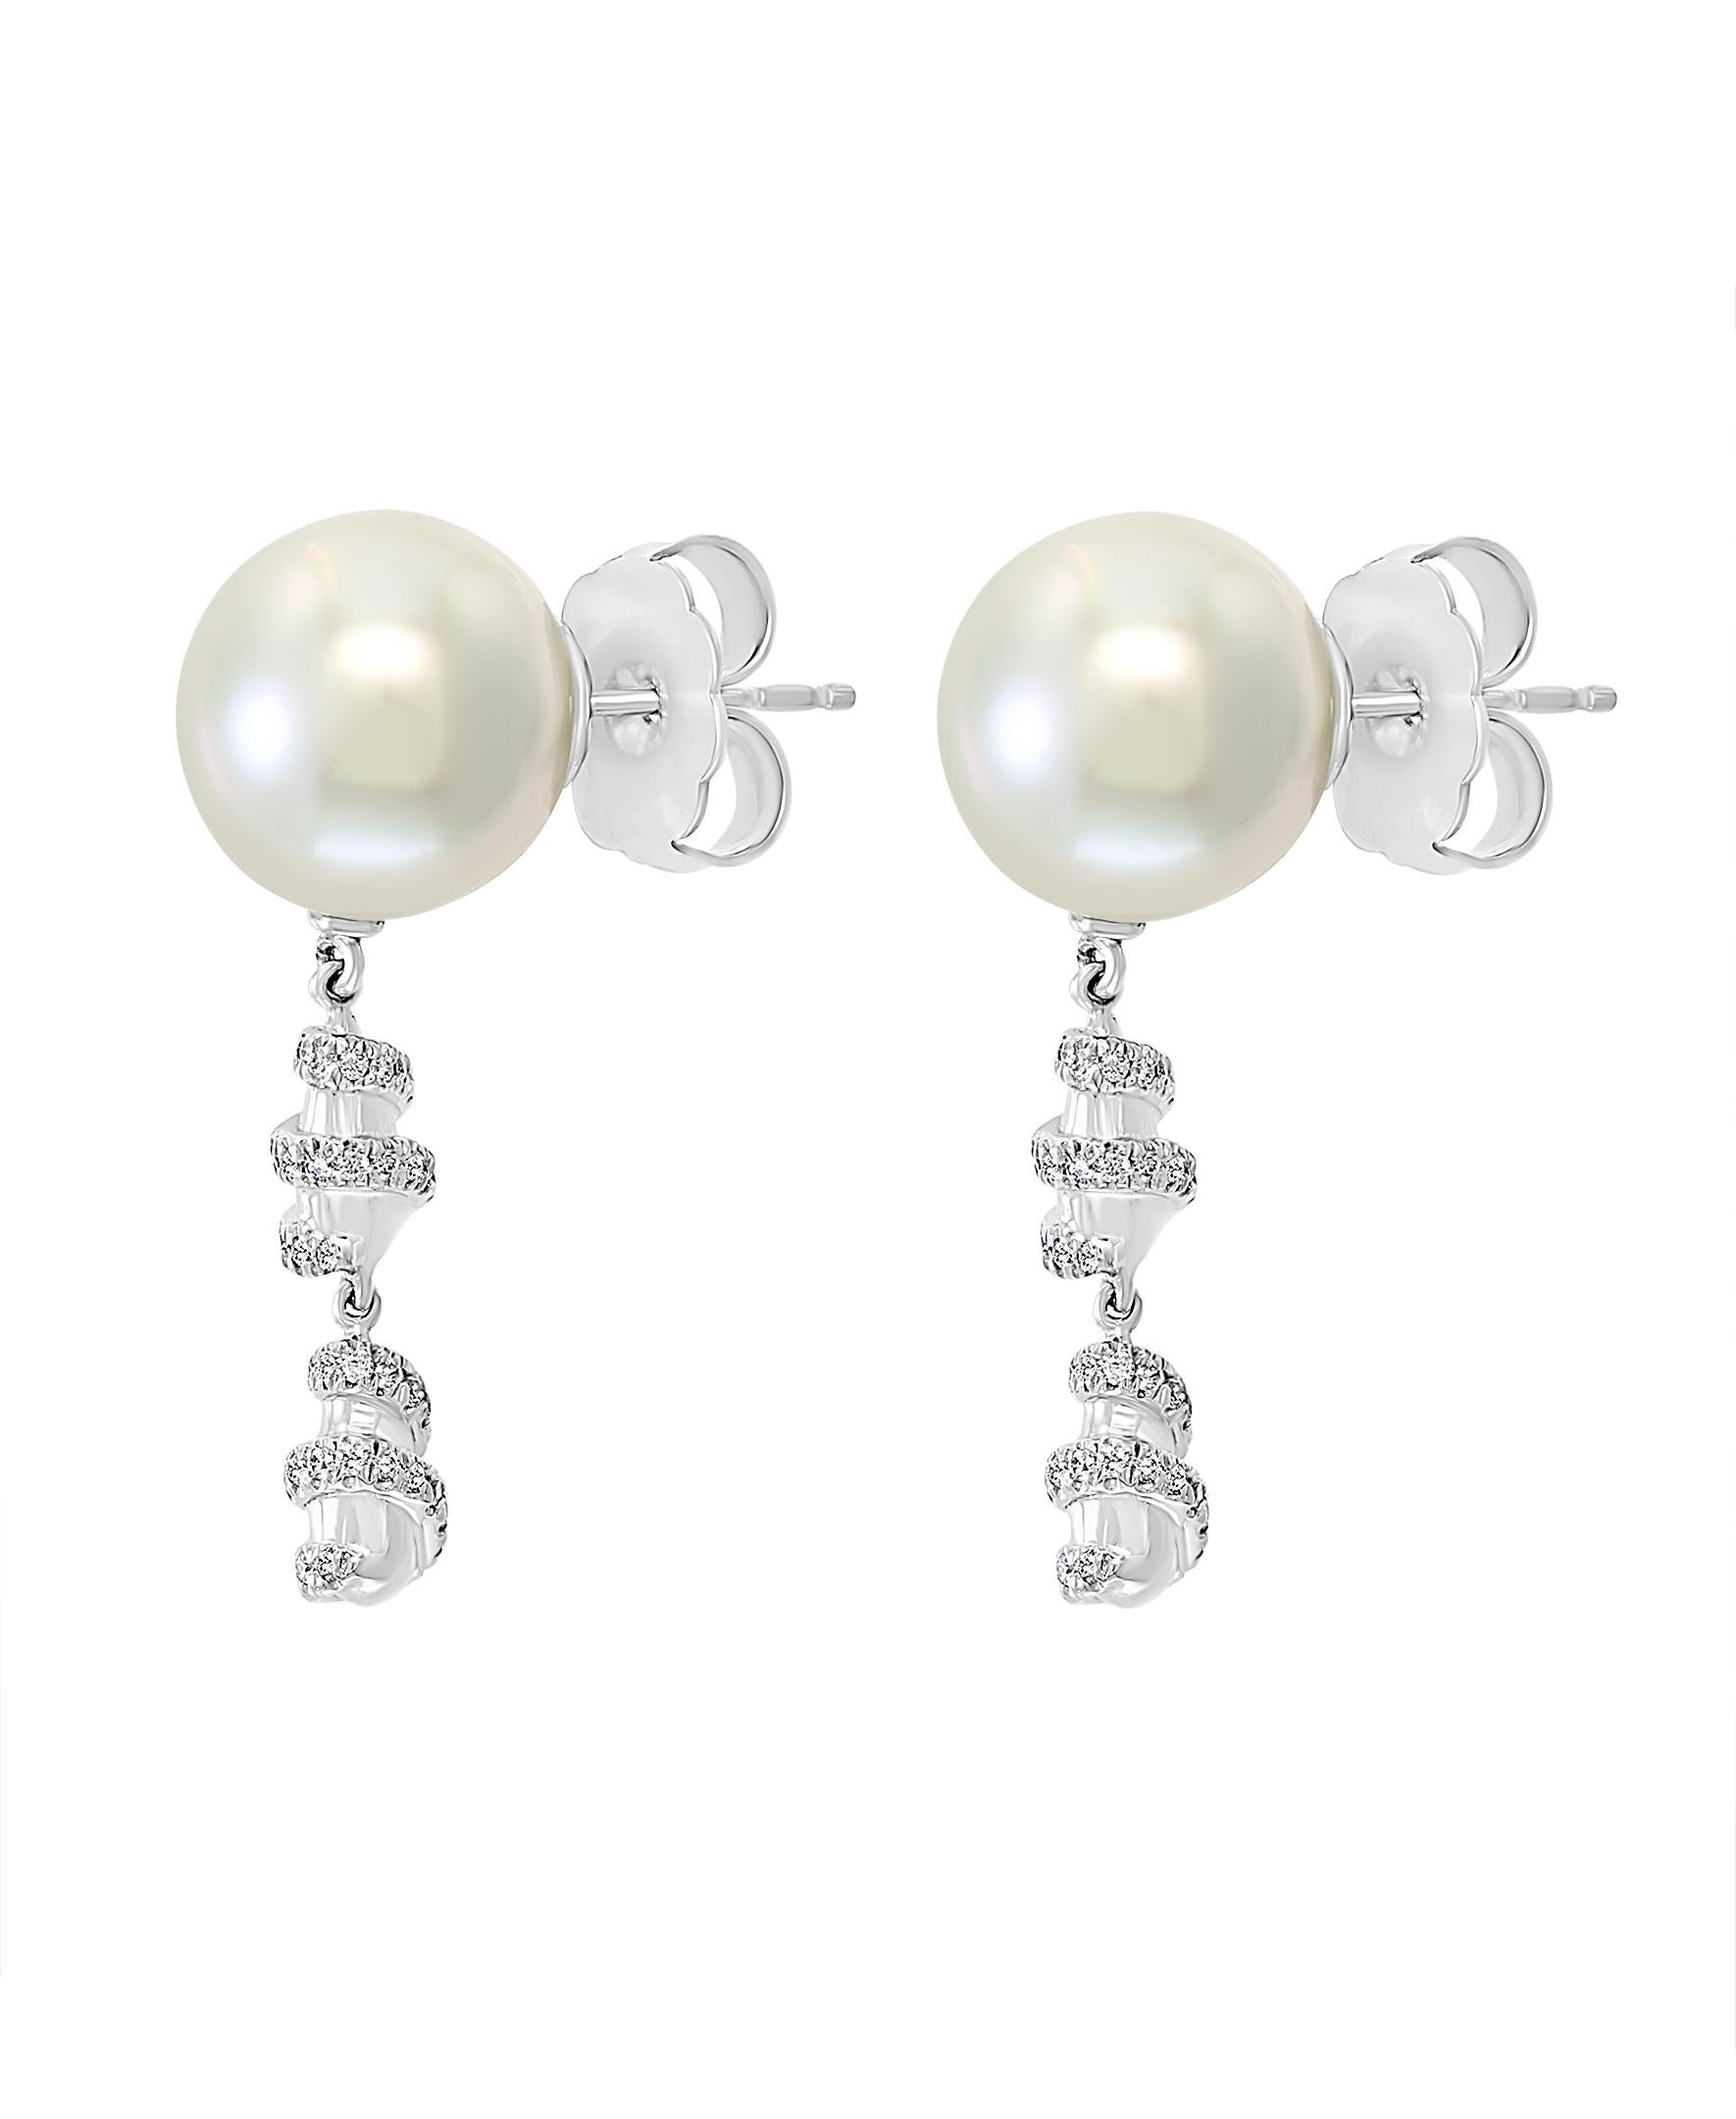 Contemporary South Sea Cultured Pearl and Diamond Earrings with 14 Karat White Gold For Sale